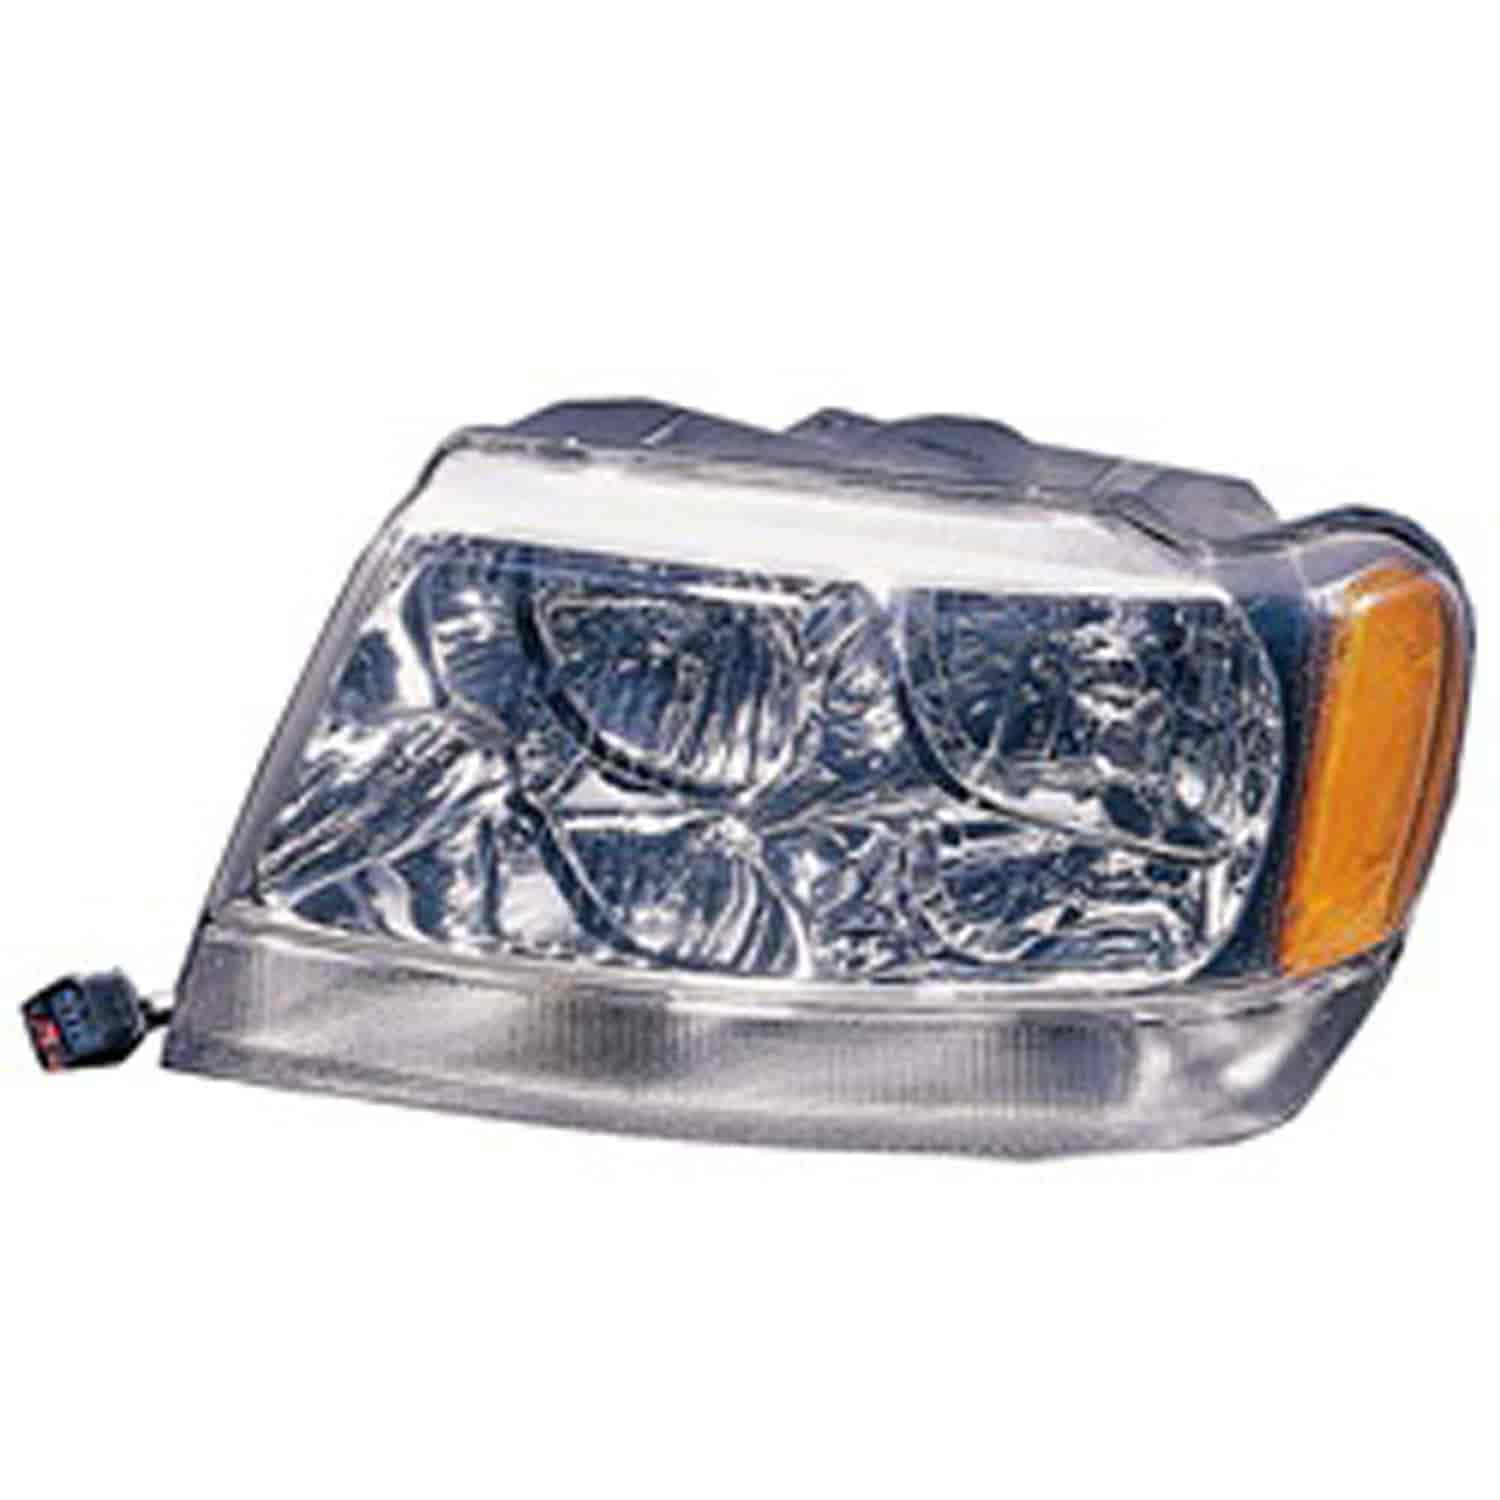 Replacement headlight assembly from Omix-ADA, Fits left side on 99-04 Jeep Grand Cherokee WJ Limited.